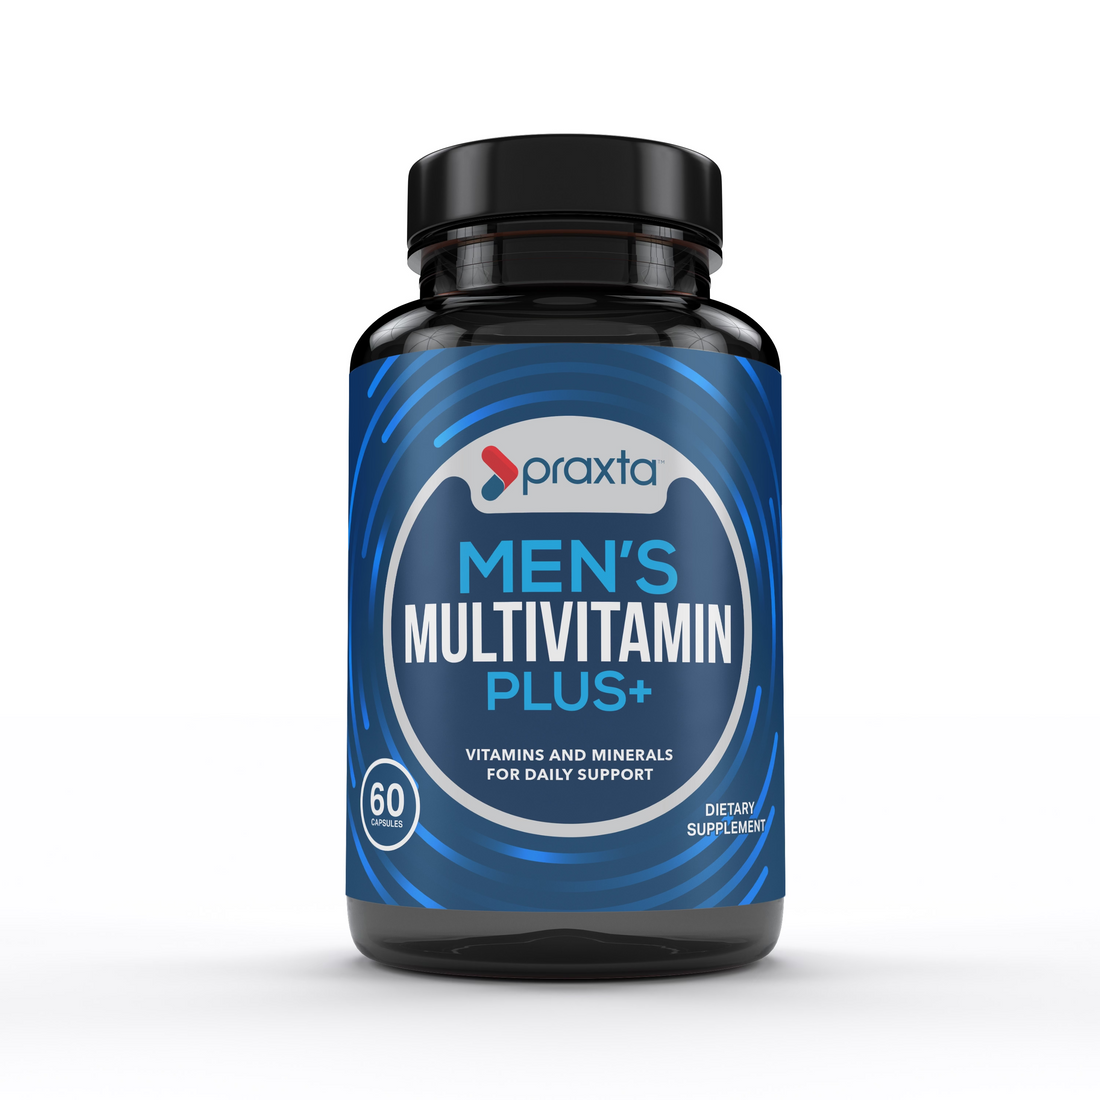 Our ONCE a DAY men’s multi vitamin PLUS+ is hitting the markets WORLDWIDE and people are LOVING them.